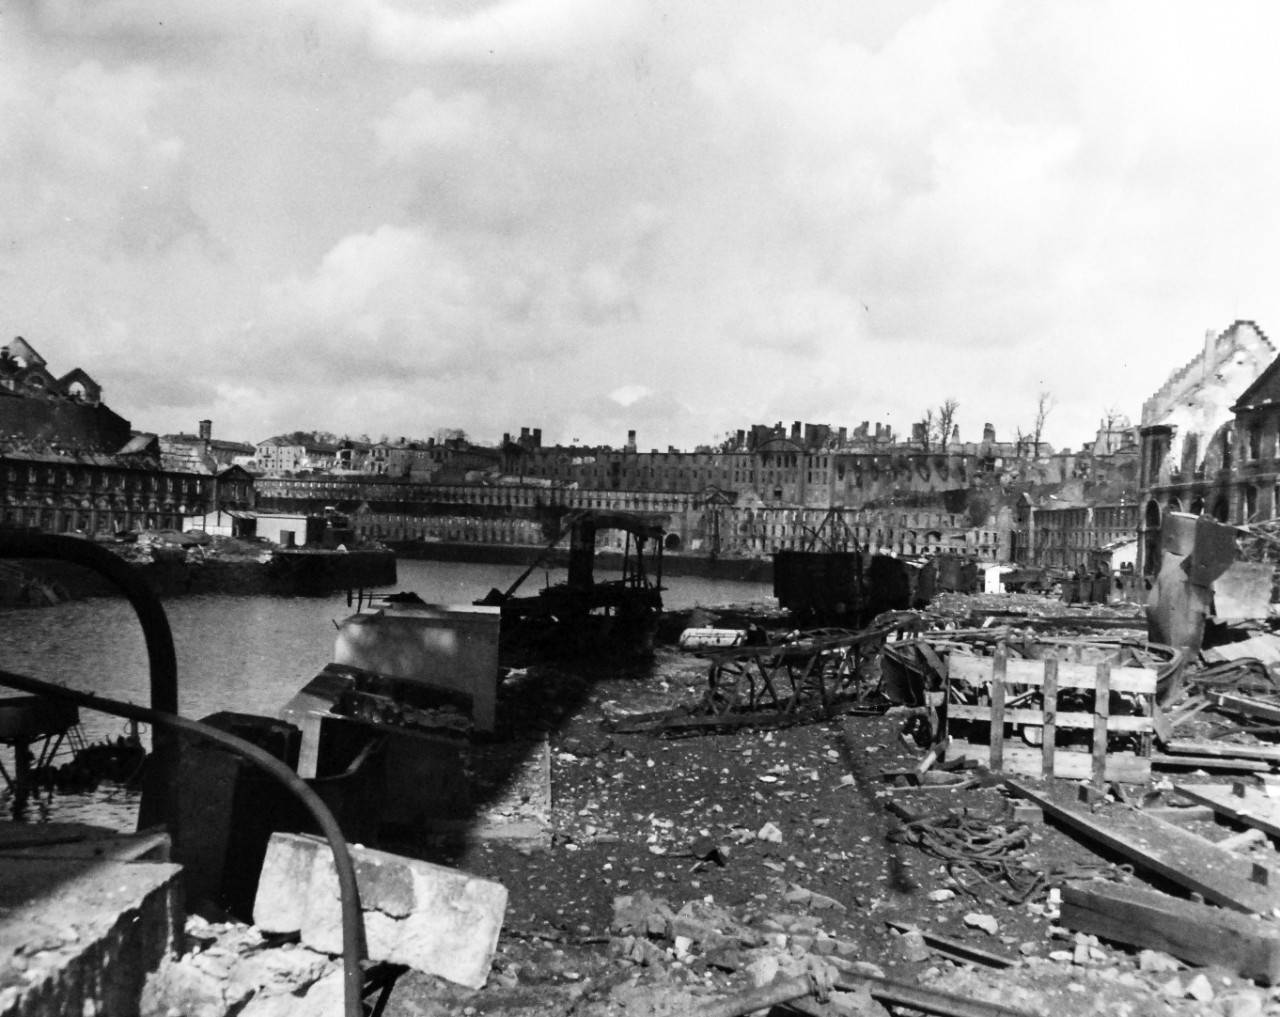 80-G-257429:  Invasion of Southern France, Brest, August-September 1944.   Allied Naval gunfire and serial bombing of Brest, France, during the battle for the liberation of the city, resulted in this devastation and wreckage.  Shown are the wrecked buildings along the water front, 27 September 1944.  Official U.S. Navy Photograph, now in the collections of the National Archives.   (2014/10/28).